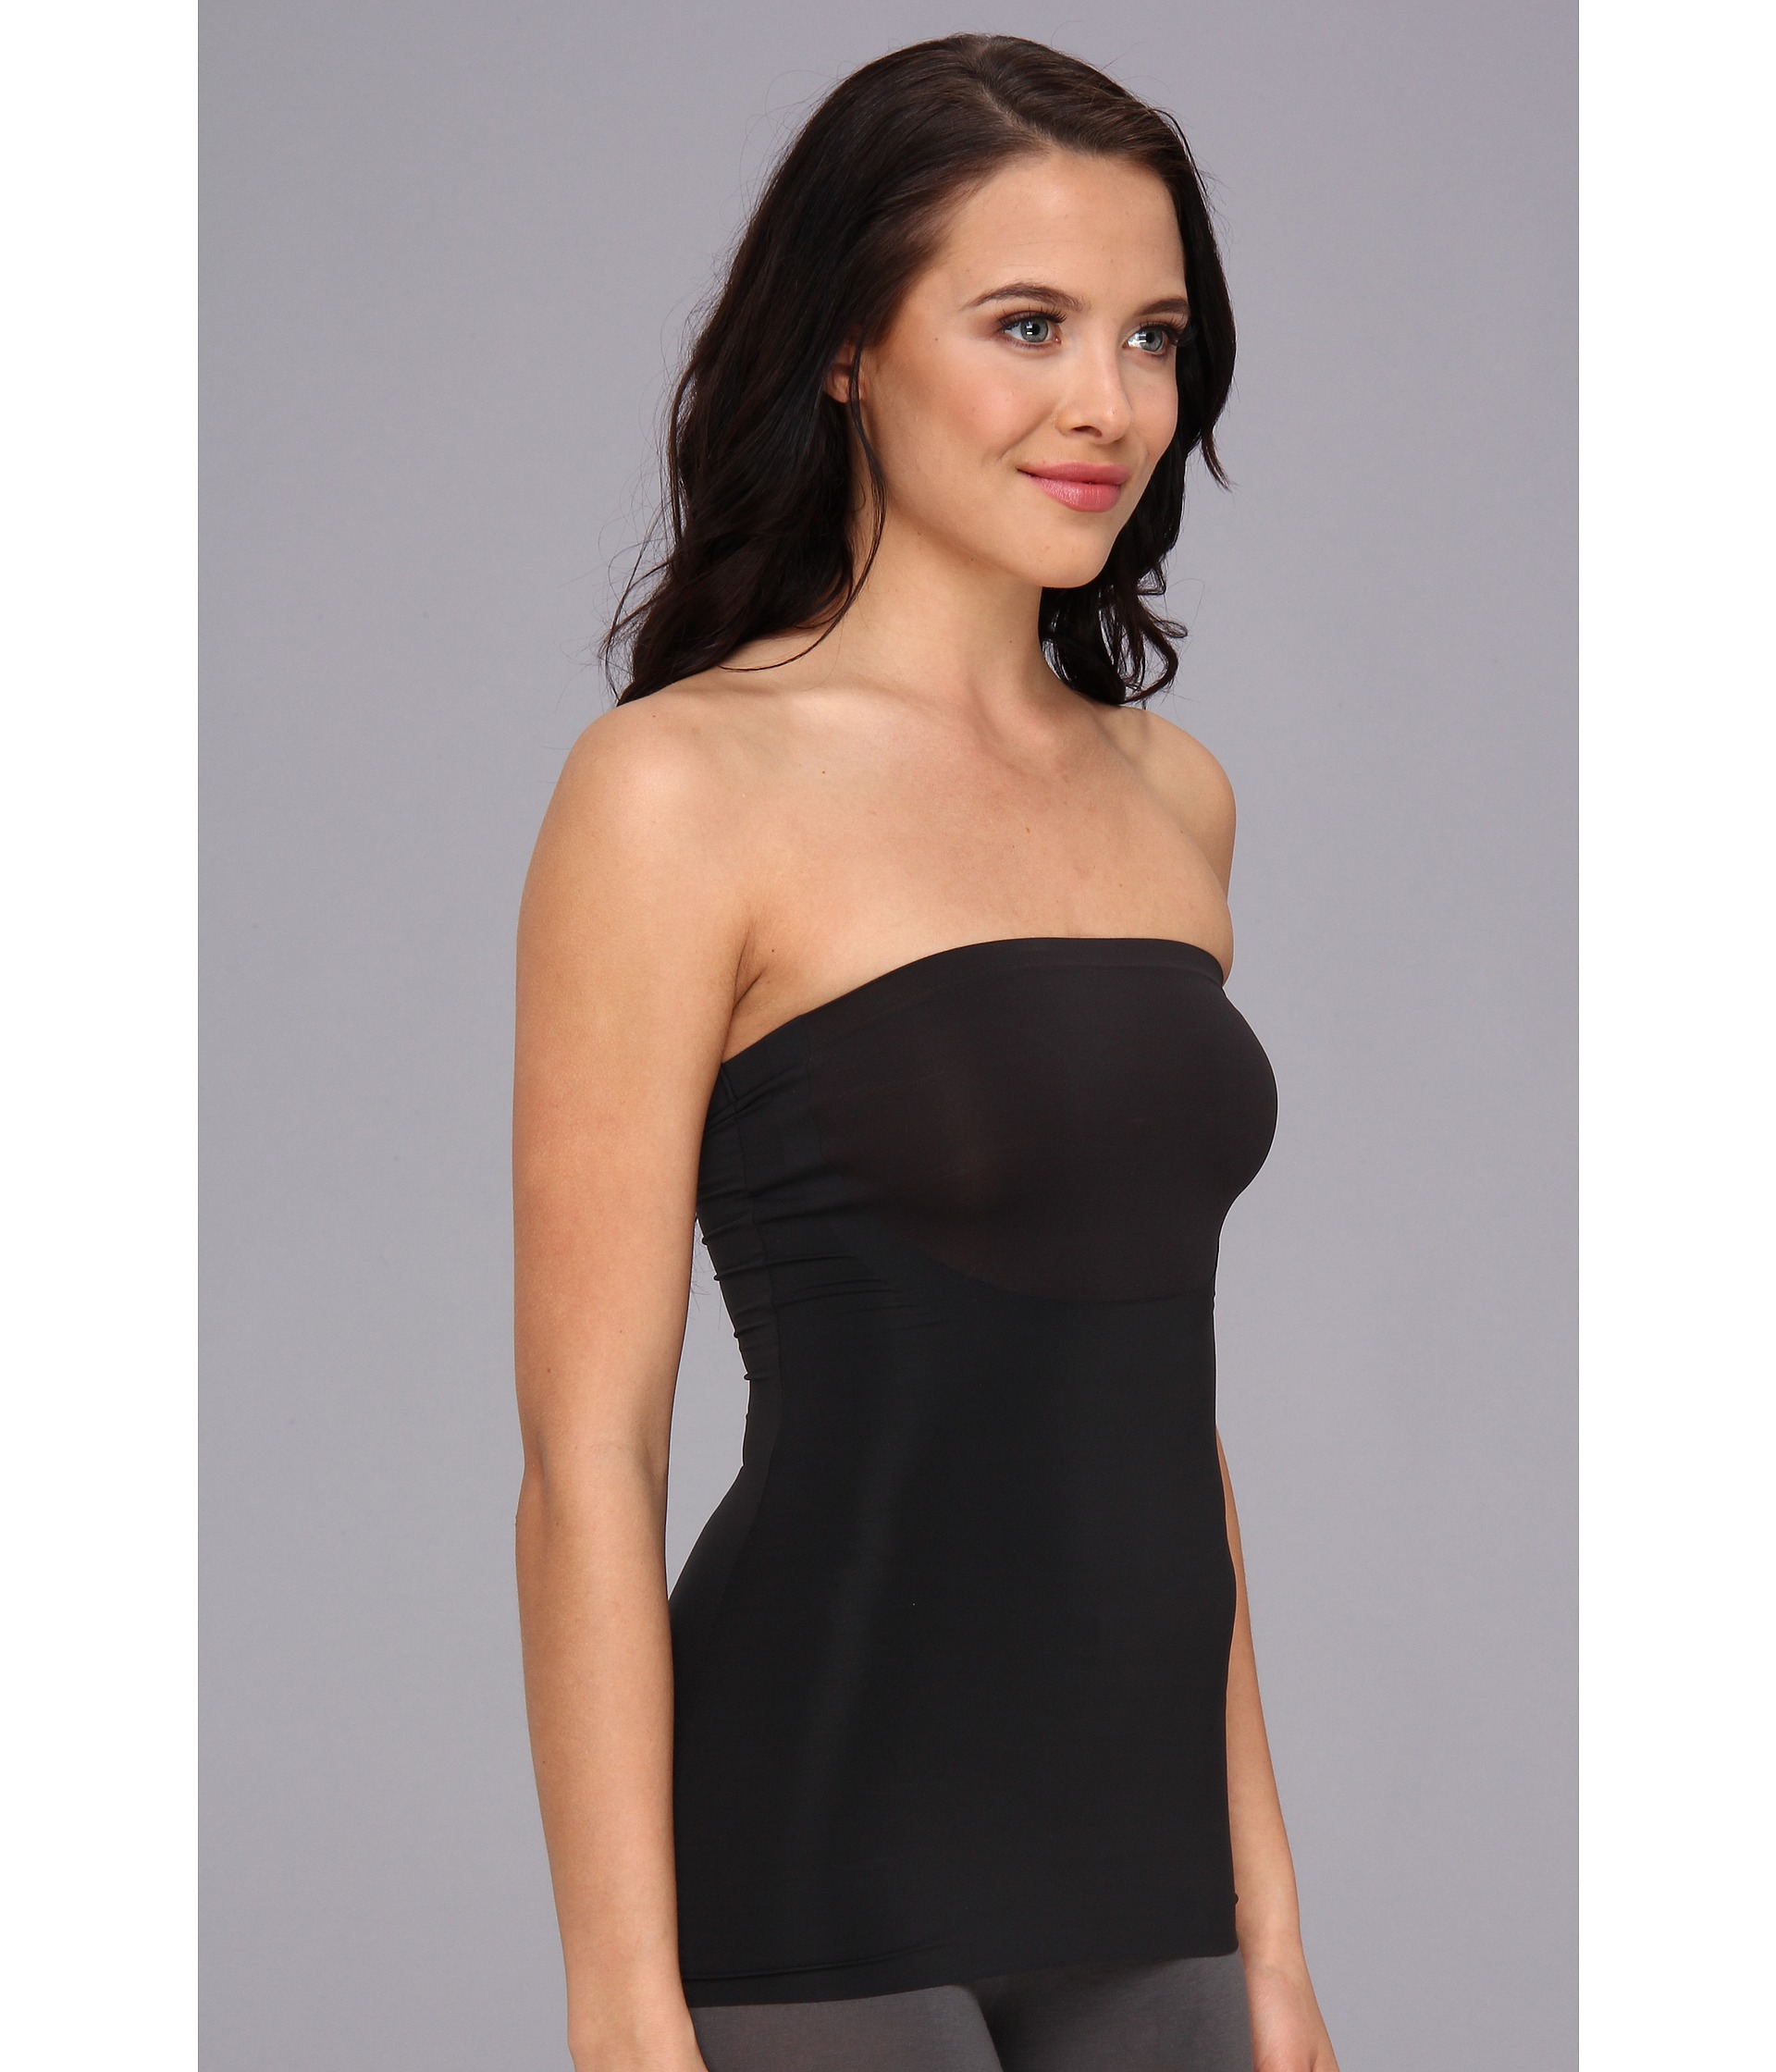 Spanx Trust Your Thinstincts Strapless Top in Black